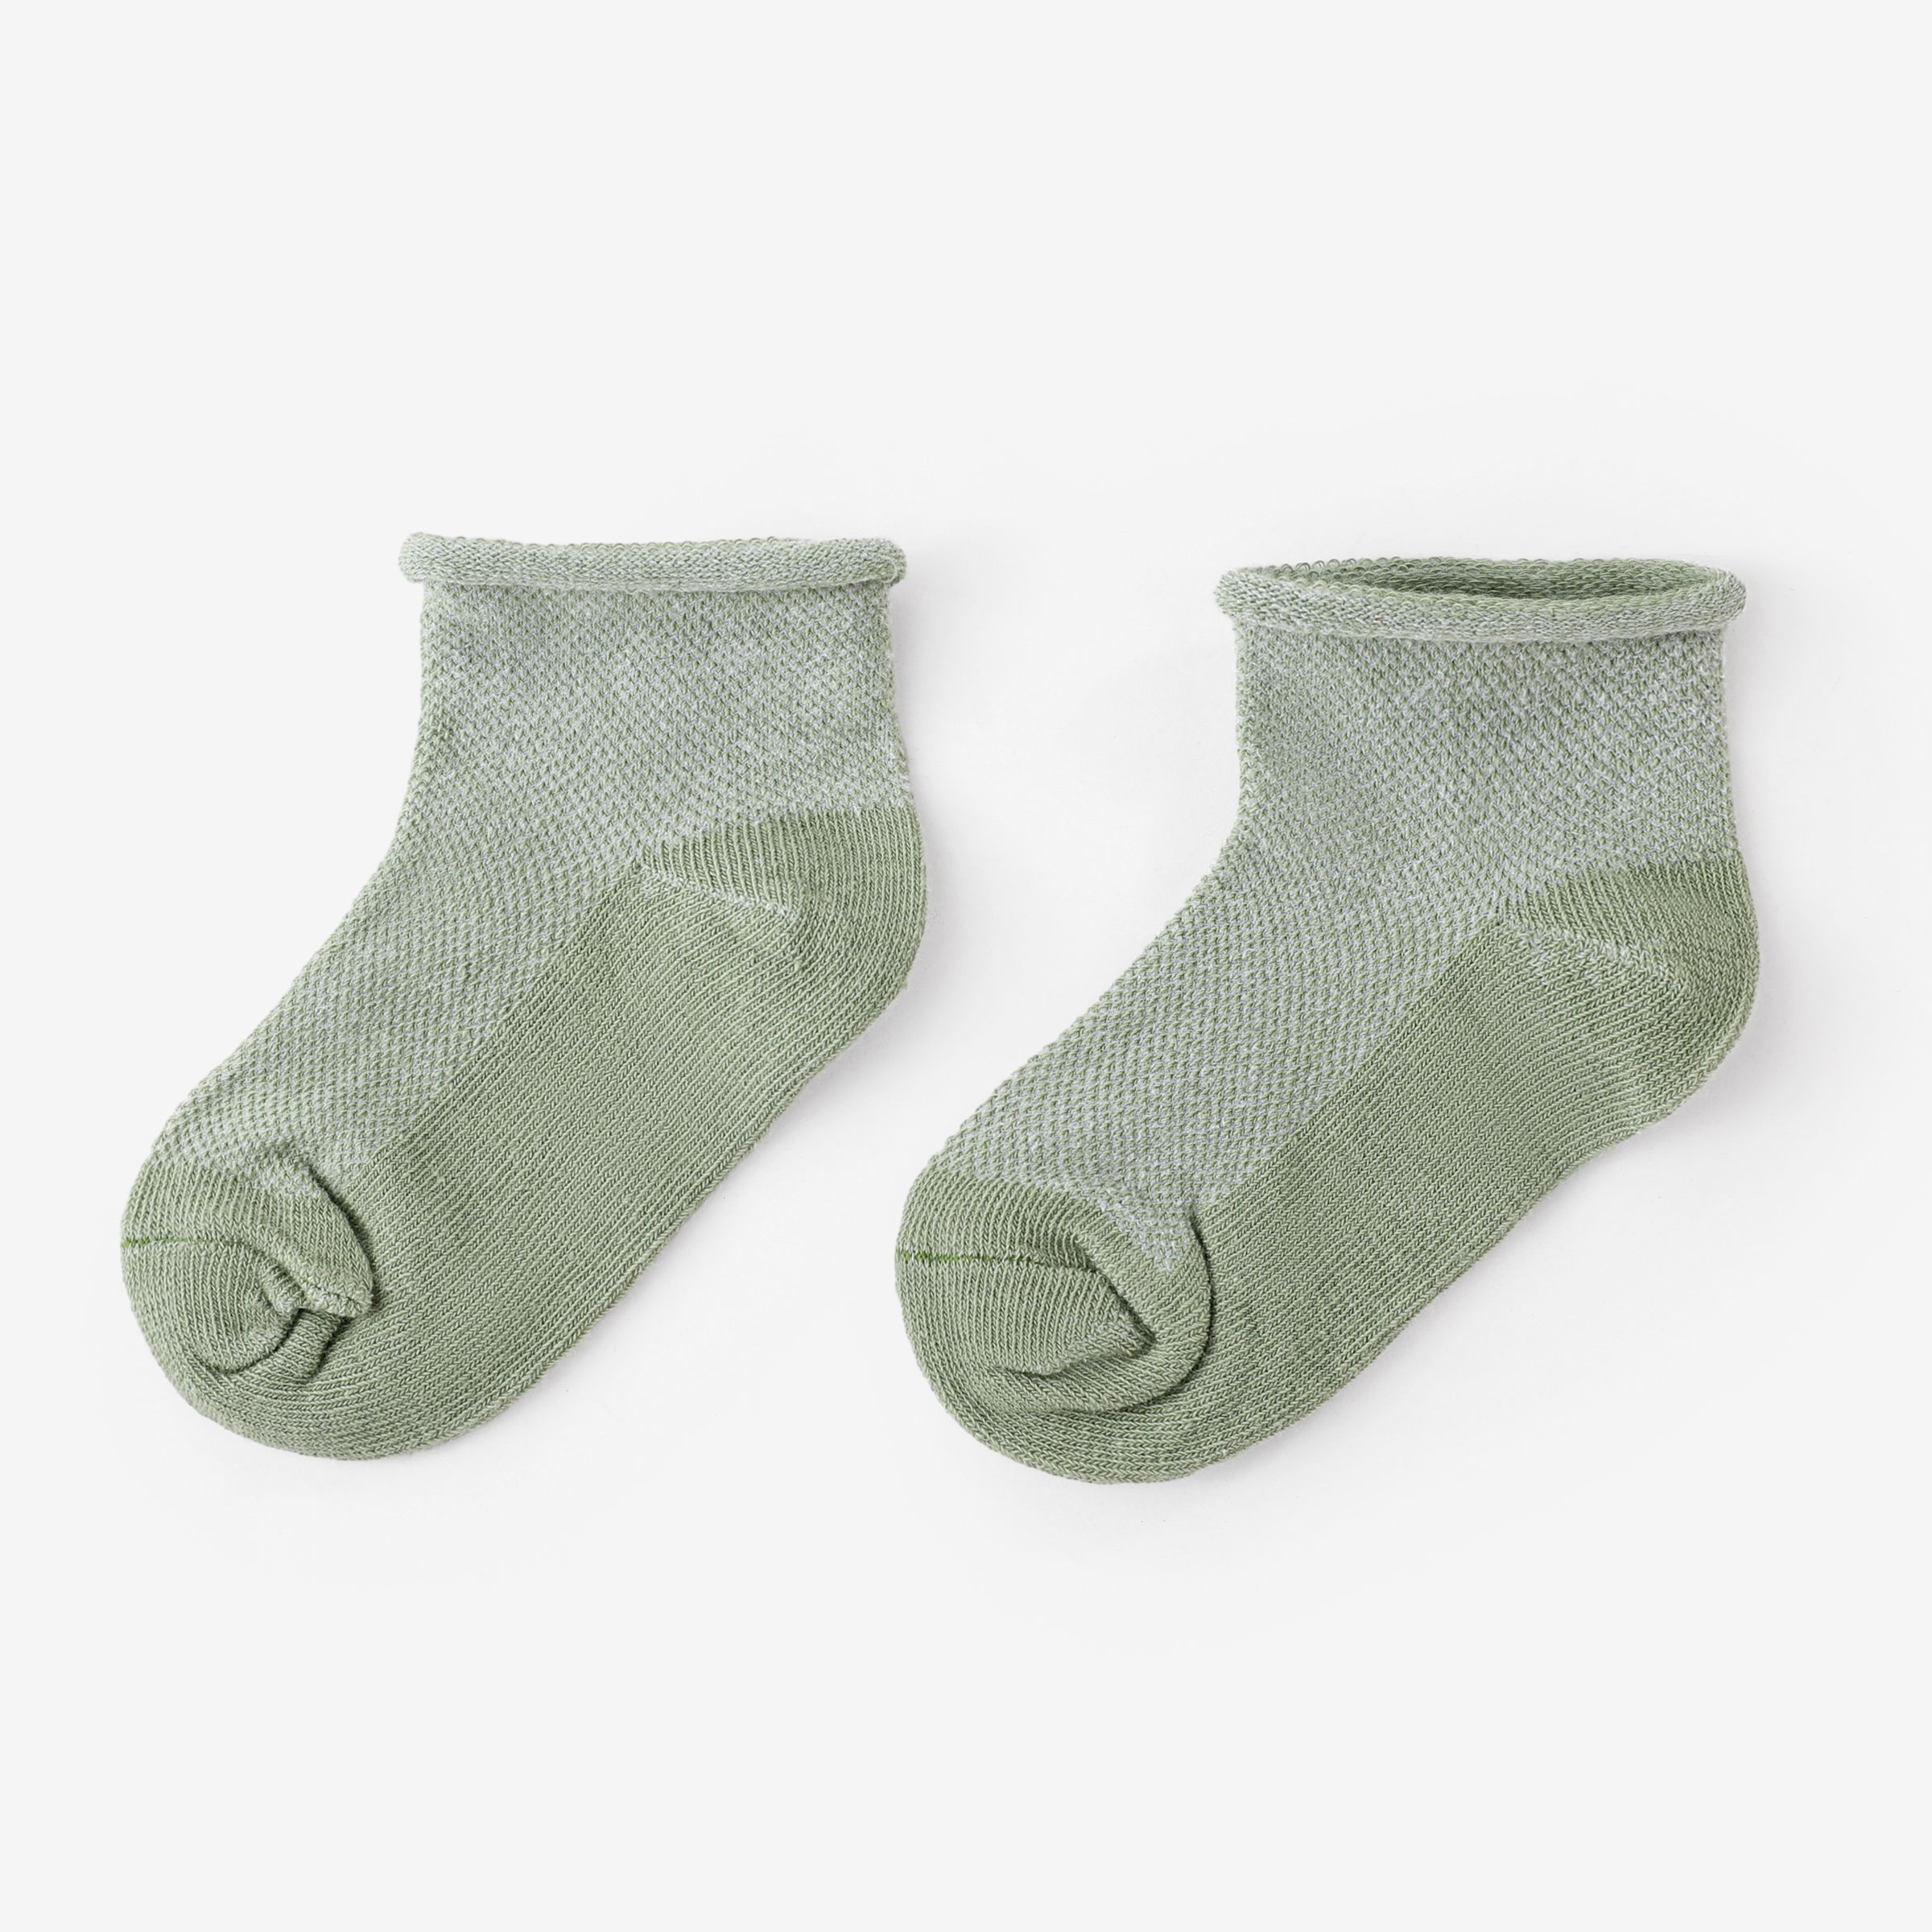 Toddler/kids Casual Breathable Cotton Socks